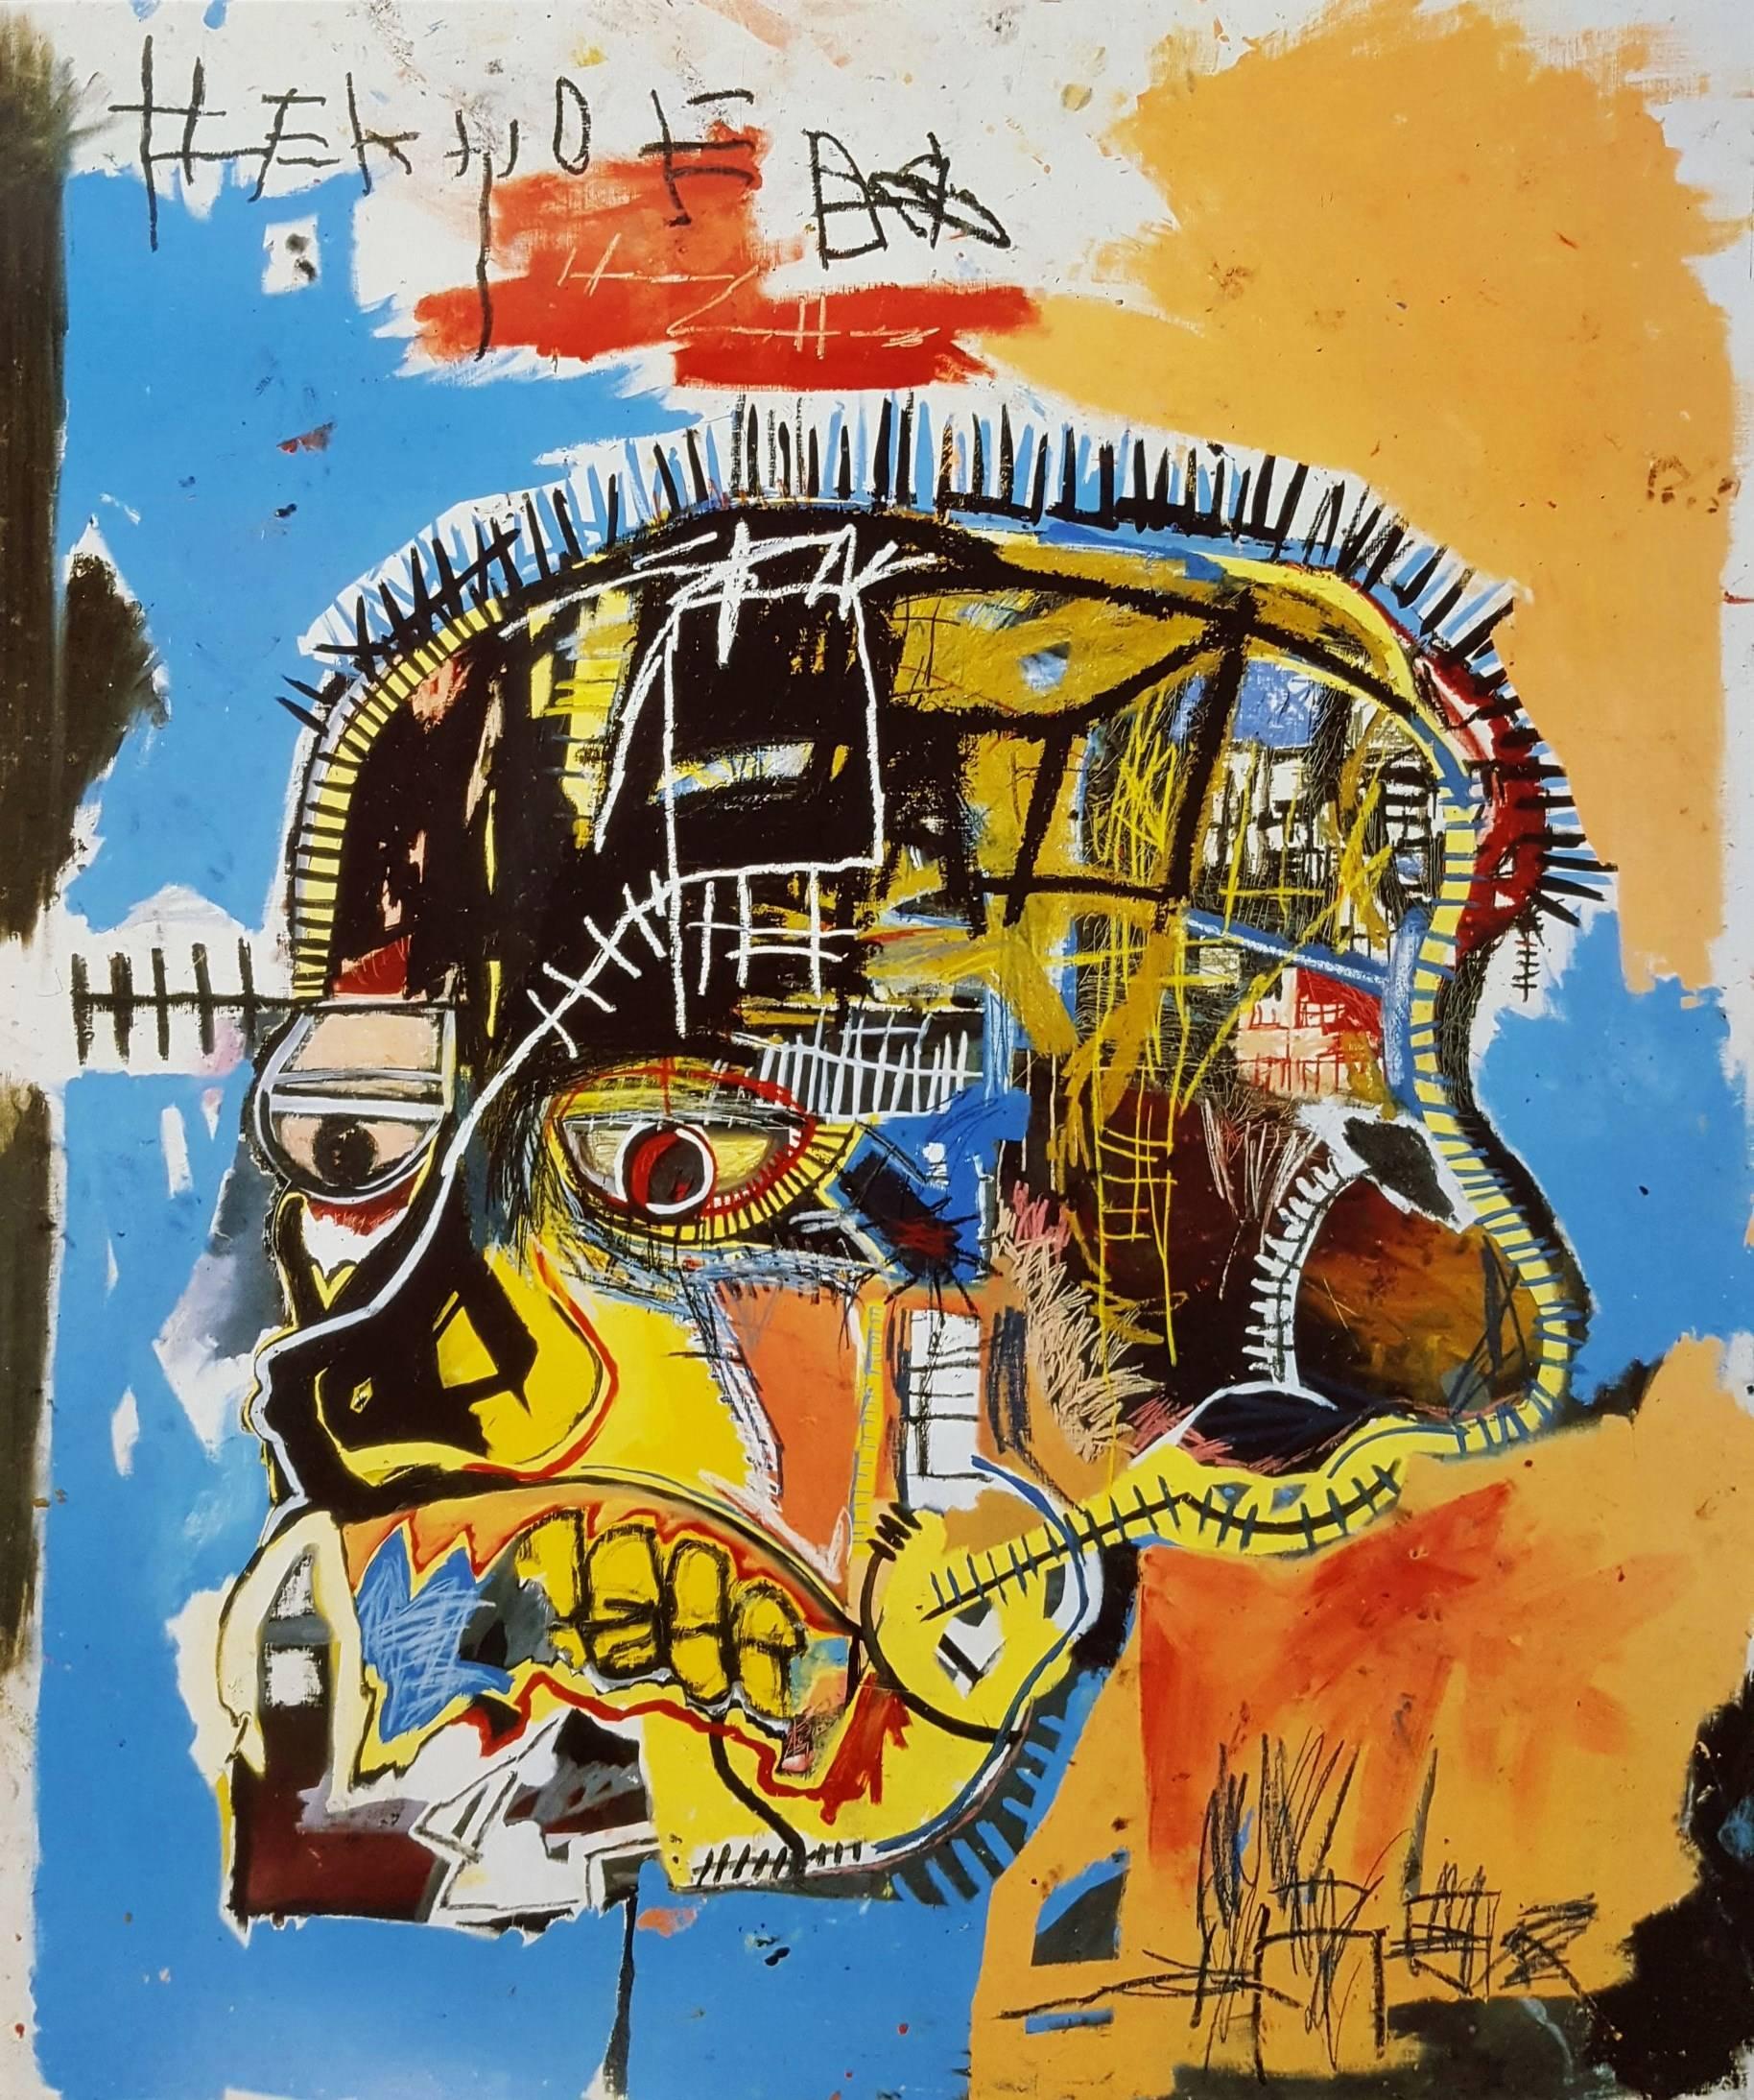 Untitled (Skull) - Print by (after) Jean-Michel Basquiat